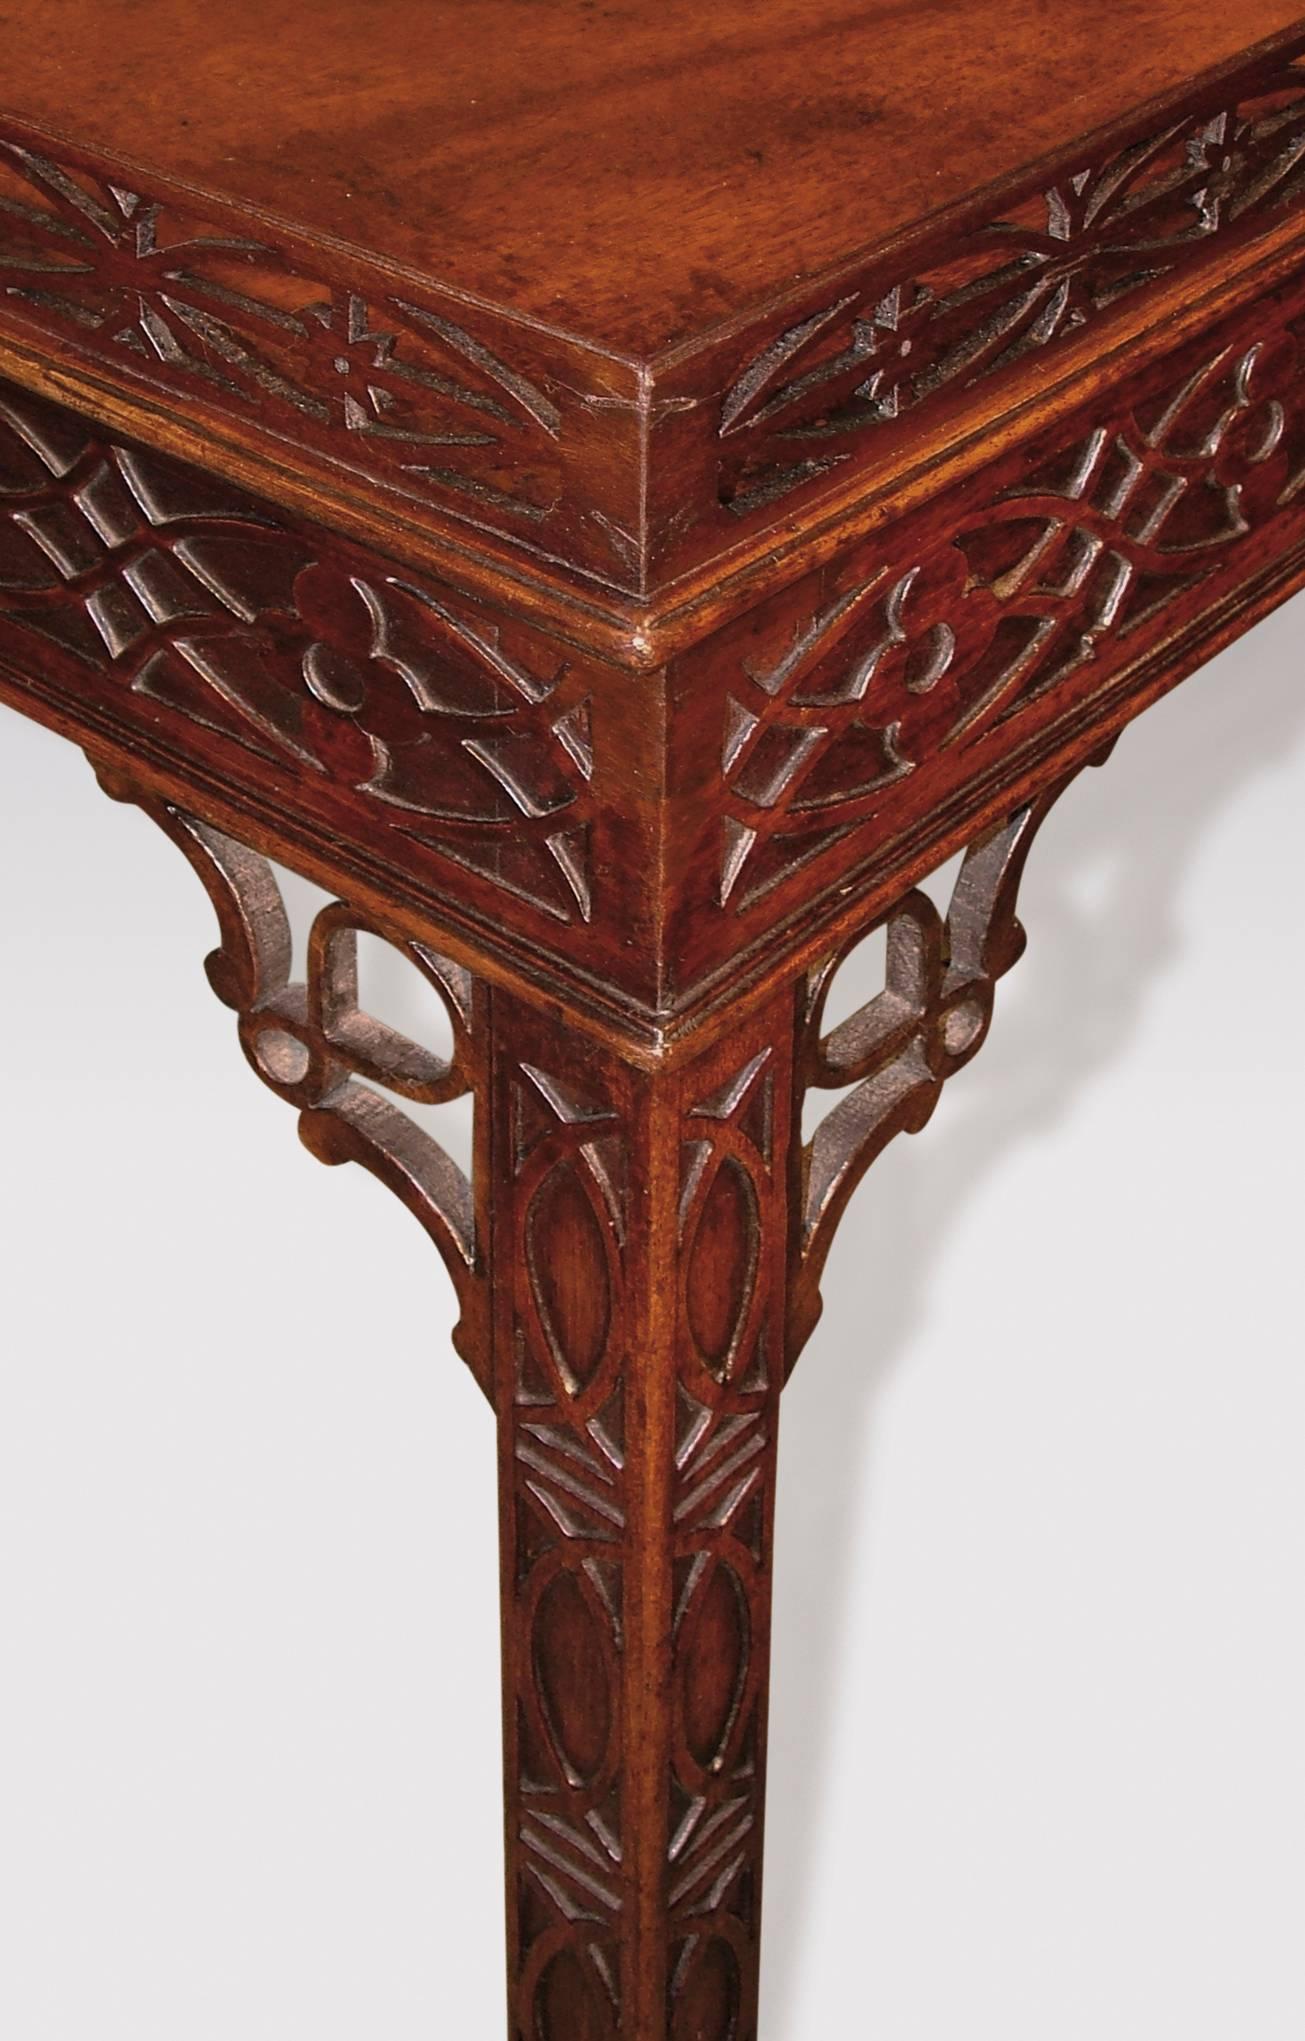 A fine mid-18th century Chippendale period well figured mahogany silver table, having oval and Gothic arch pierced gallery, above similar blind fretwork frieze. The Table having interlaced corner brackets, supported on blind fretwork chamfered legs,